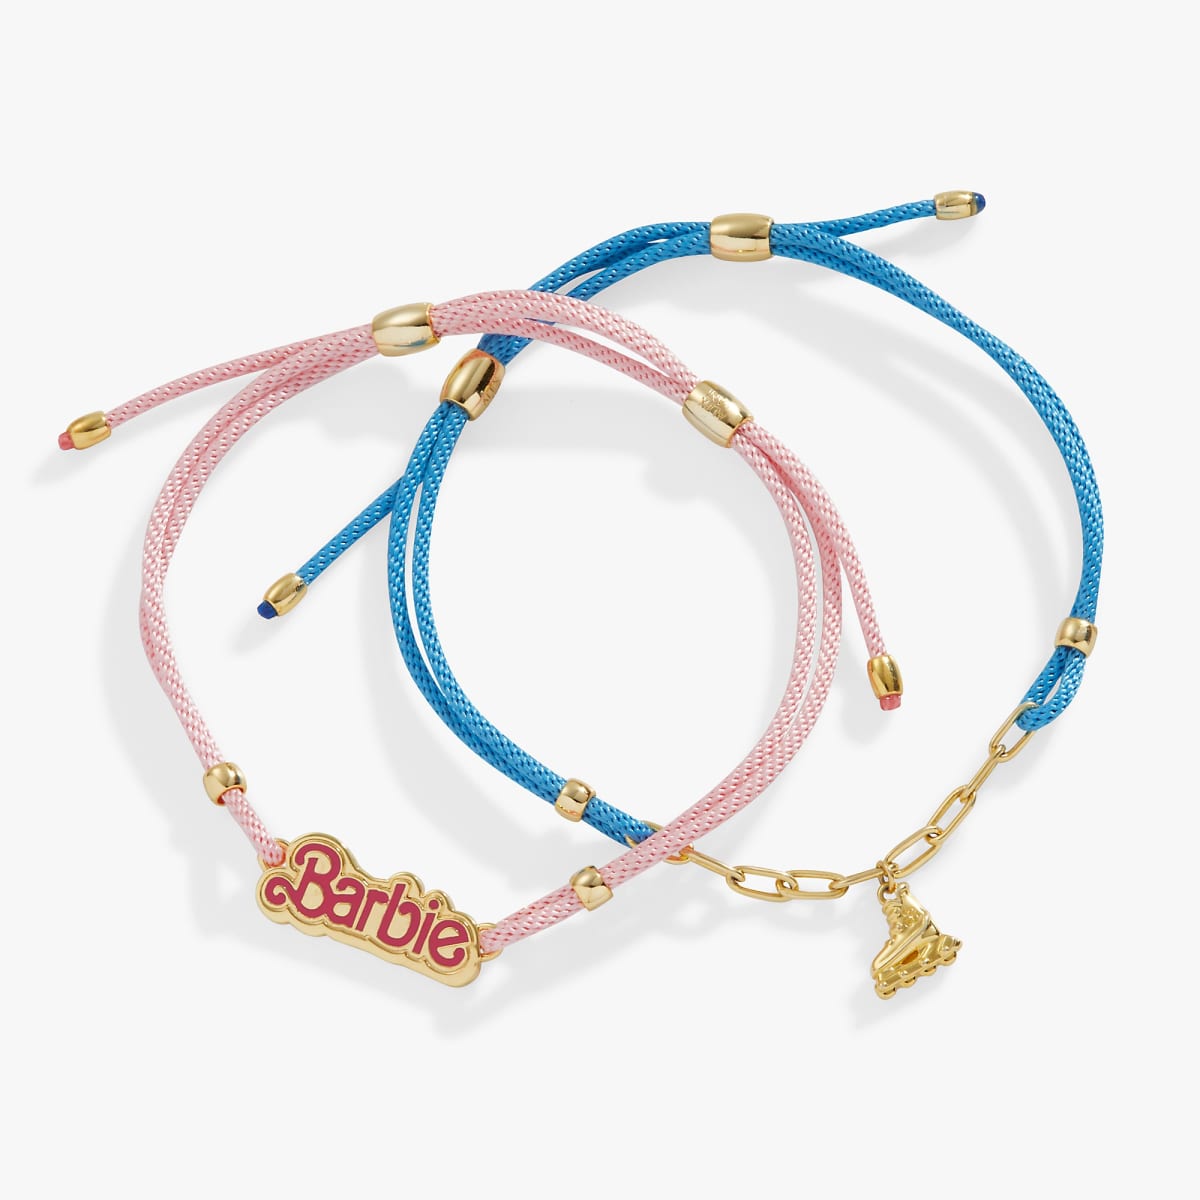 Barbie™ The Movie Cord, Set of 2 – Alex and Ani